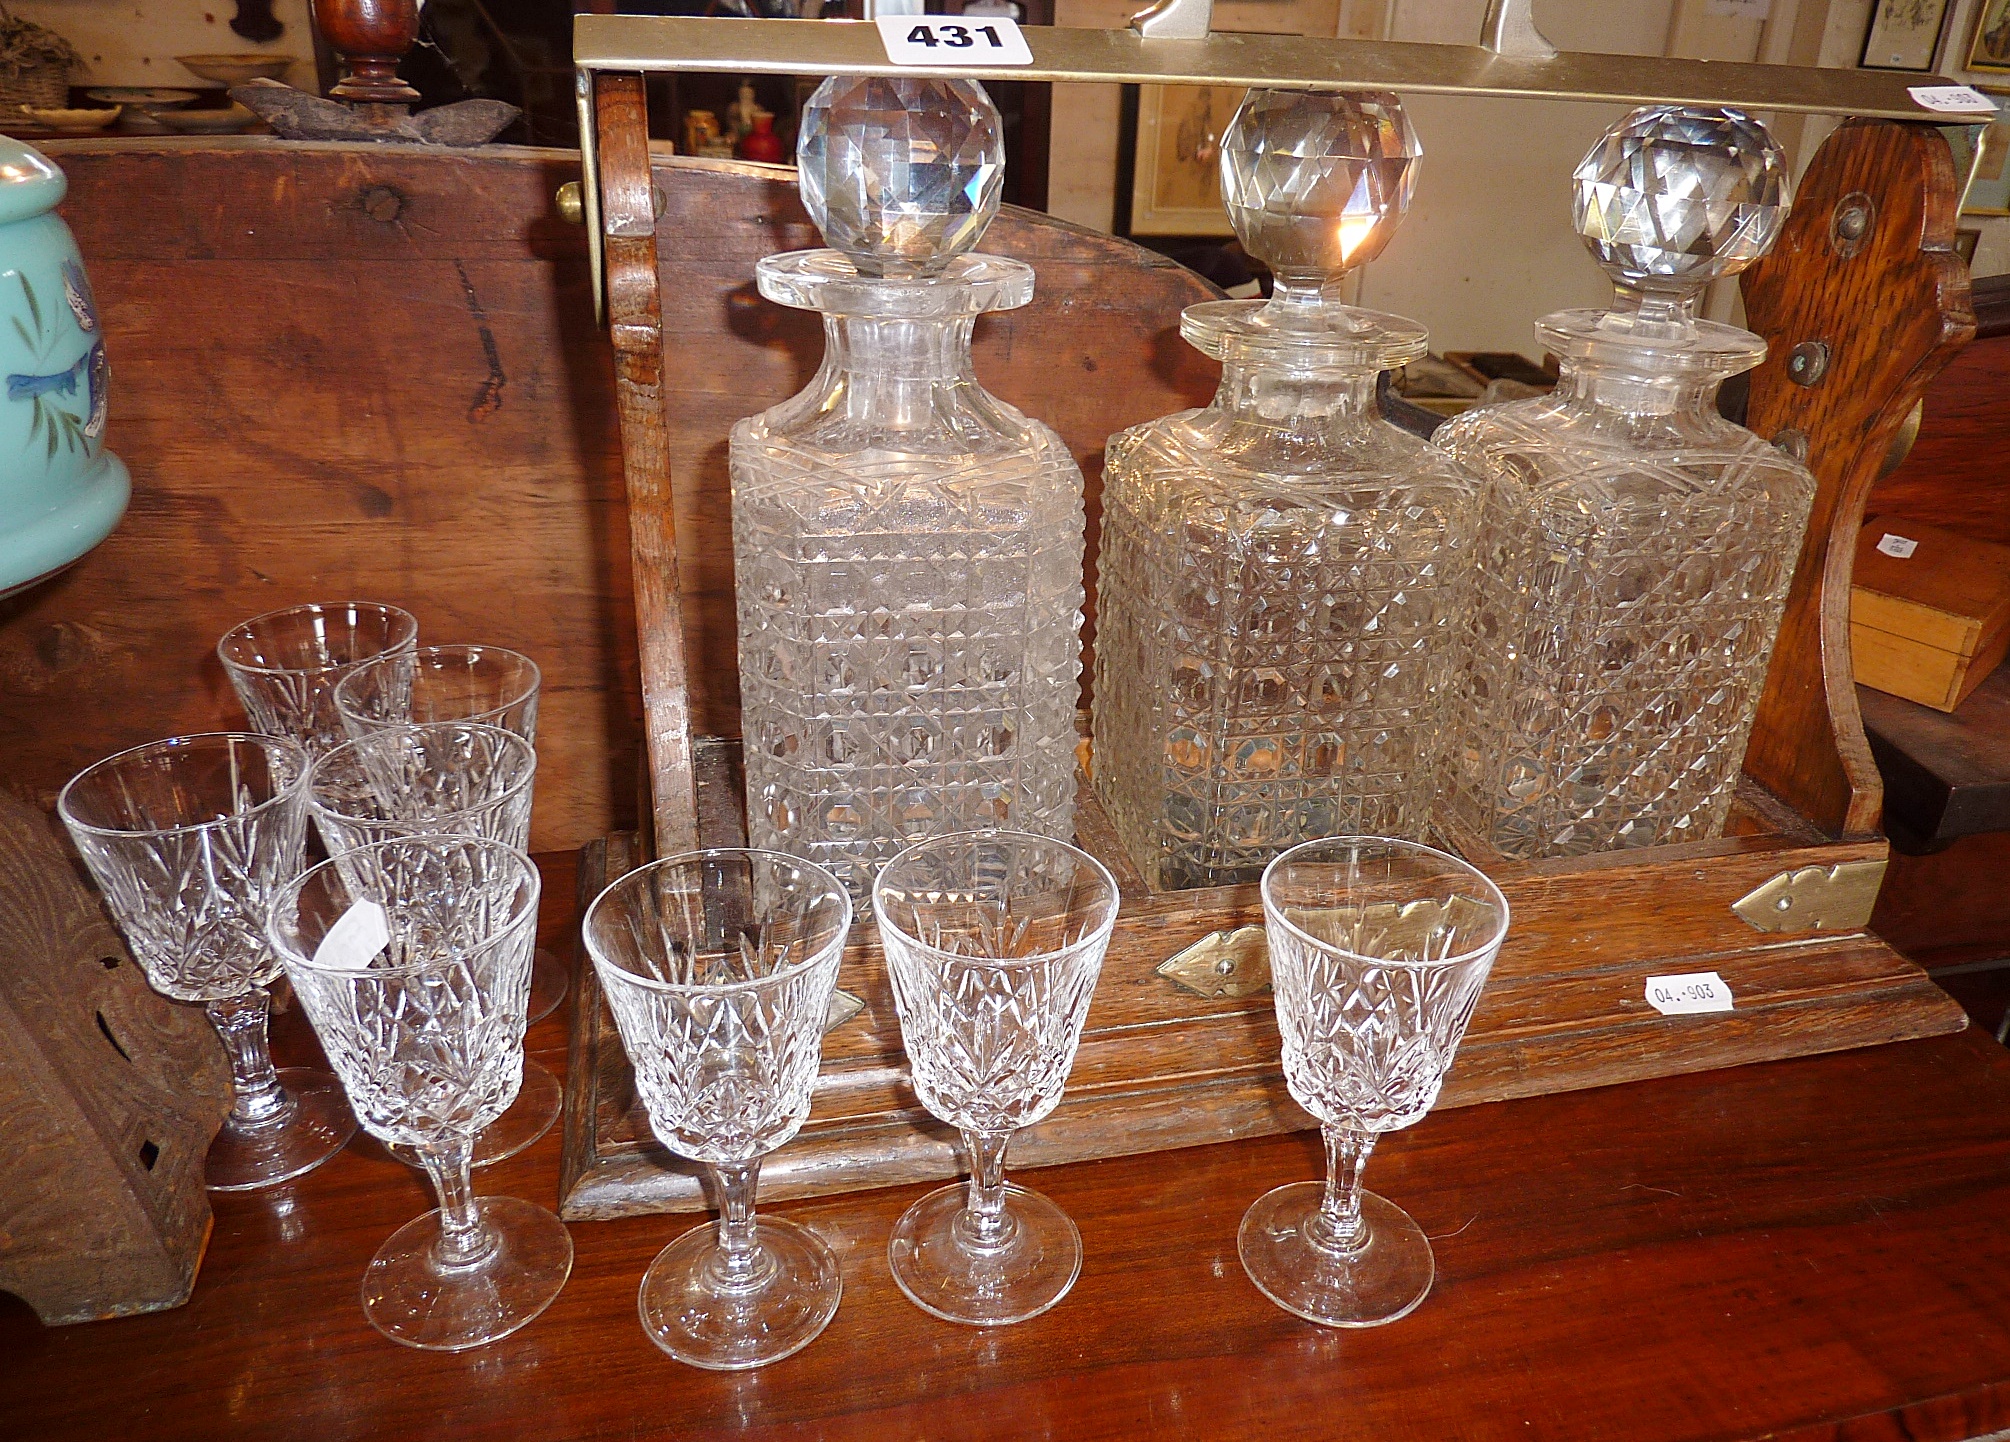 Hobnail cut glass 3-decanter oak tantalus, with a set of 8 sherry glasses